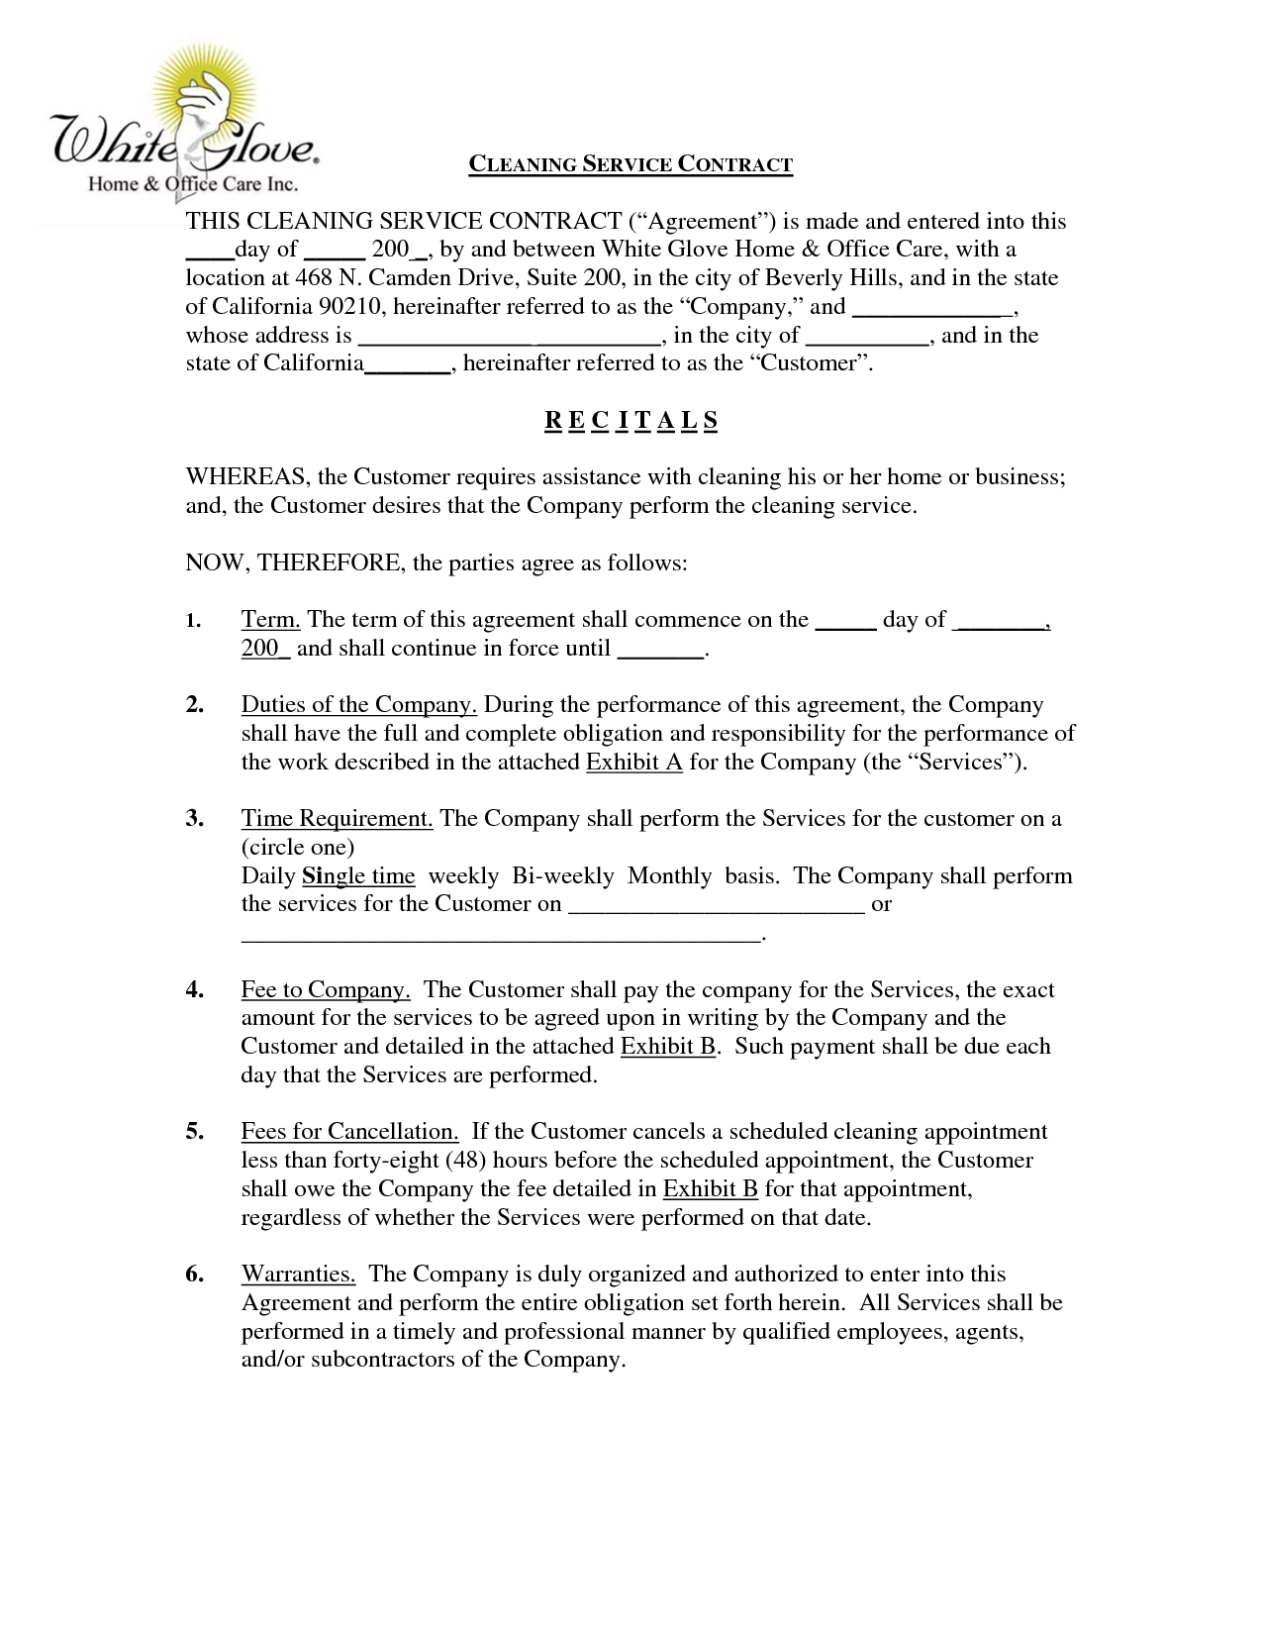 Cleaning Services Contract Agreement - Free Printable Documents Regarding Commercial Cleaning Service Agreement Template